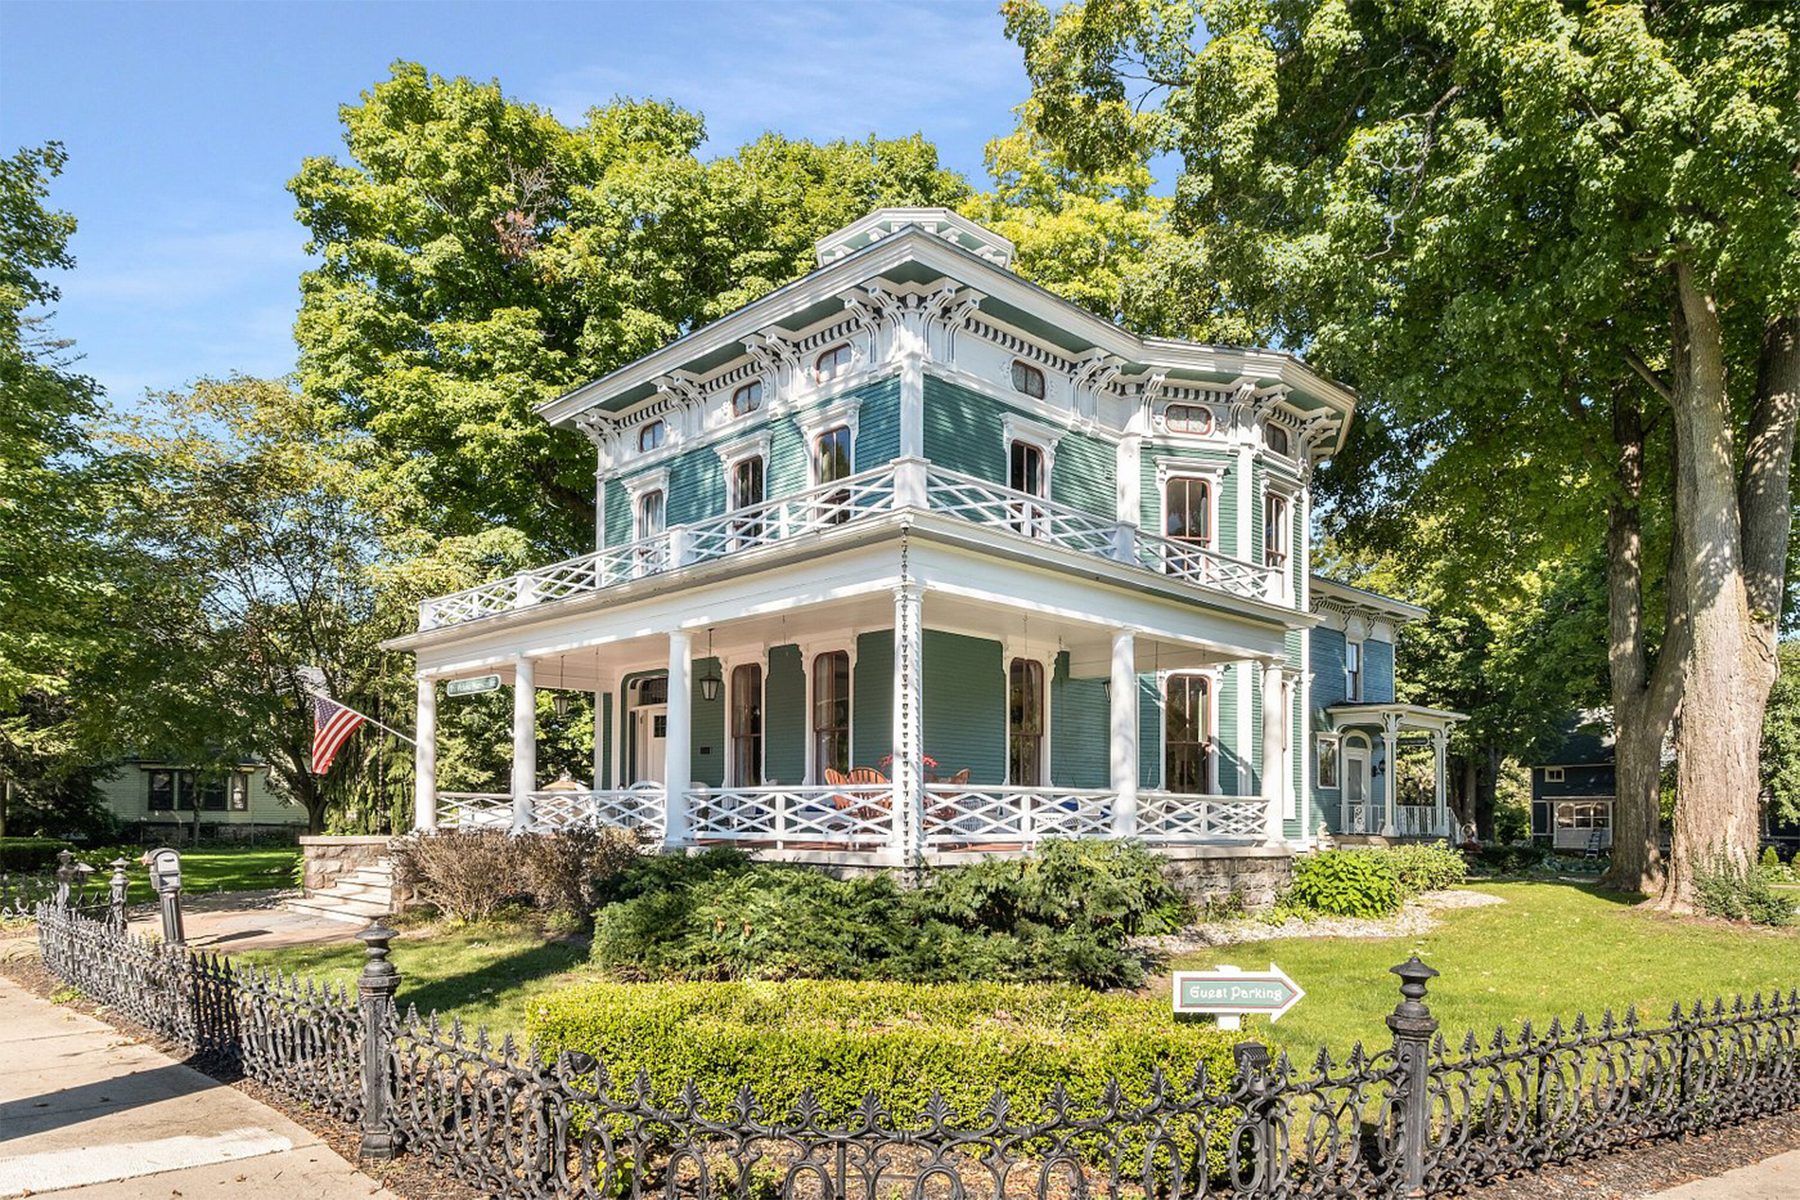 <h3>Allegan, Michigan</h3> <p class=""><strong>Best for: </strong>A historic yet eclectic stay close to Lake Michigan Shore's Wine Trail</p> <p>This stunning home in a quiet neighborhood in Allegan has been catching the eyes of residents and visitors for more than 160 years. Owner Todd Green was also drawn to the beautiful historic home that was sitting empty when he and his wife, Nia Green, purchased it out of bankruptcy in 2020. As a local farmer and business owner with a background as a residential builder and renovator, Green knew the historic Italianate Renaissance home (dating back to 1863) had good bones and was structurally sound. After freshening up the interior and beautiful woodwork, the Greens opened the <a href="https://www.tripadvisor.com/Hotel_Review-g29543-d22867835-Reviews-Jade_Estate_Inn-Allegan_Allegan_County_Michigan.html" rel="noopener">Jade Estate Inn</a> later that year as the fourth bed-and-breakfast to be in the home since 1987.</p> <p>Restored to its original grandeur, it's decked with opulent furnishings and period antiques, Victorian draperies, four-poster beds and Oriental rugs. The inn's six rooms (one located in the carriage house) feature queen or king beds and jetted tubs, and most rooms have fireplaces. A sweet or savory homemade breakfast is served each morning in the dining room. Guests have the option for a lighter continental offering or a grab-and-go breakfast. You'll also find afternoon snacks and refreshments in the dining room in the afternoon.</p> <p><strong>Pros:</strong></p> <ul> <li class="">Close to the <a href="https://www.rd.com/list/best-wineries/">wineries and vineyards</a> around Lake Michigan</li> <li class="">A short drive from the coastal towns of Grand Haven, South Haven and Saugatuck</li> <li class="">Within walking distance to historic downtown Allegan</li> </ul> <p><strong>Cons: </strong></p> <ul> <li class="">Guests must be 18 years of age or older</li> <li class="">The inn is not pet-friendly</li> </ul> <p class="listicle-page__cta-button-shop"><a class="shop-btn" href="https://www.tripadvisor.com/Hotel_Review-g29543-d22867835-Reviews-Jade_Estate_Inn-Allegan_Allegan_County_Michigan.html">Book Now</a></p>